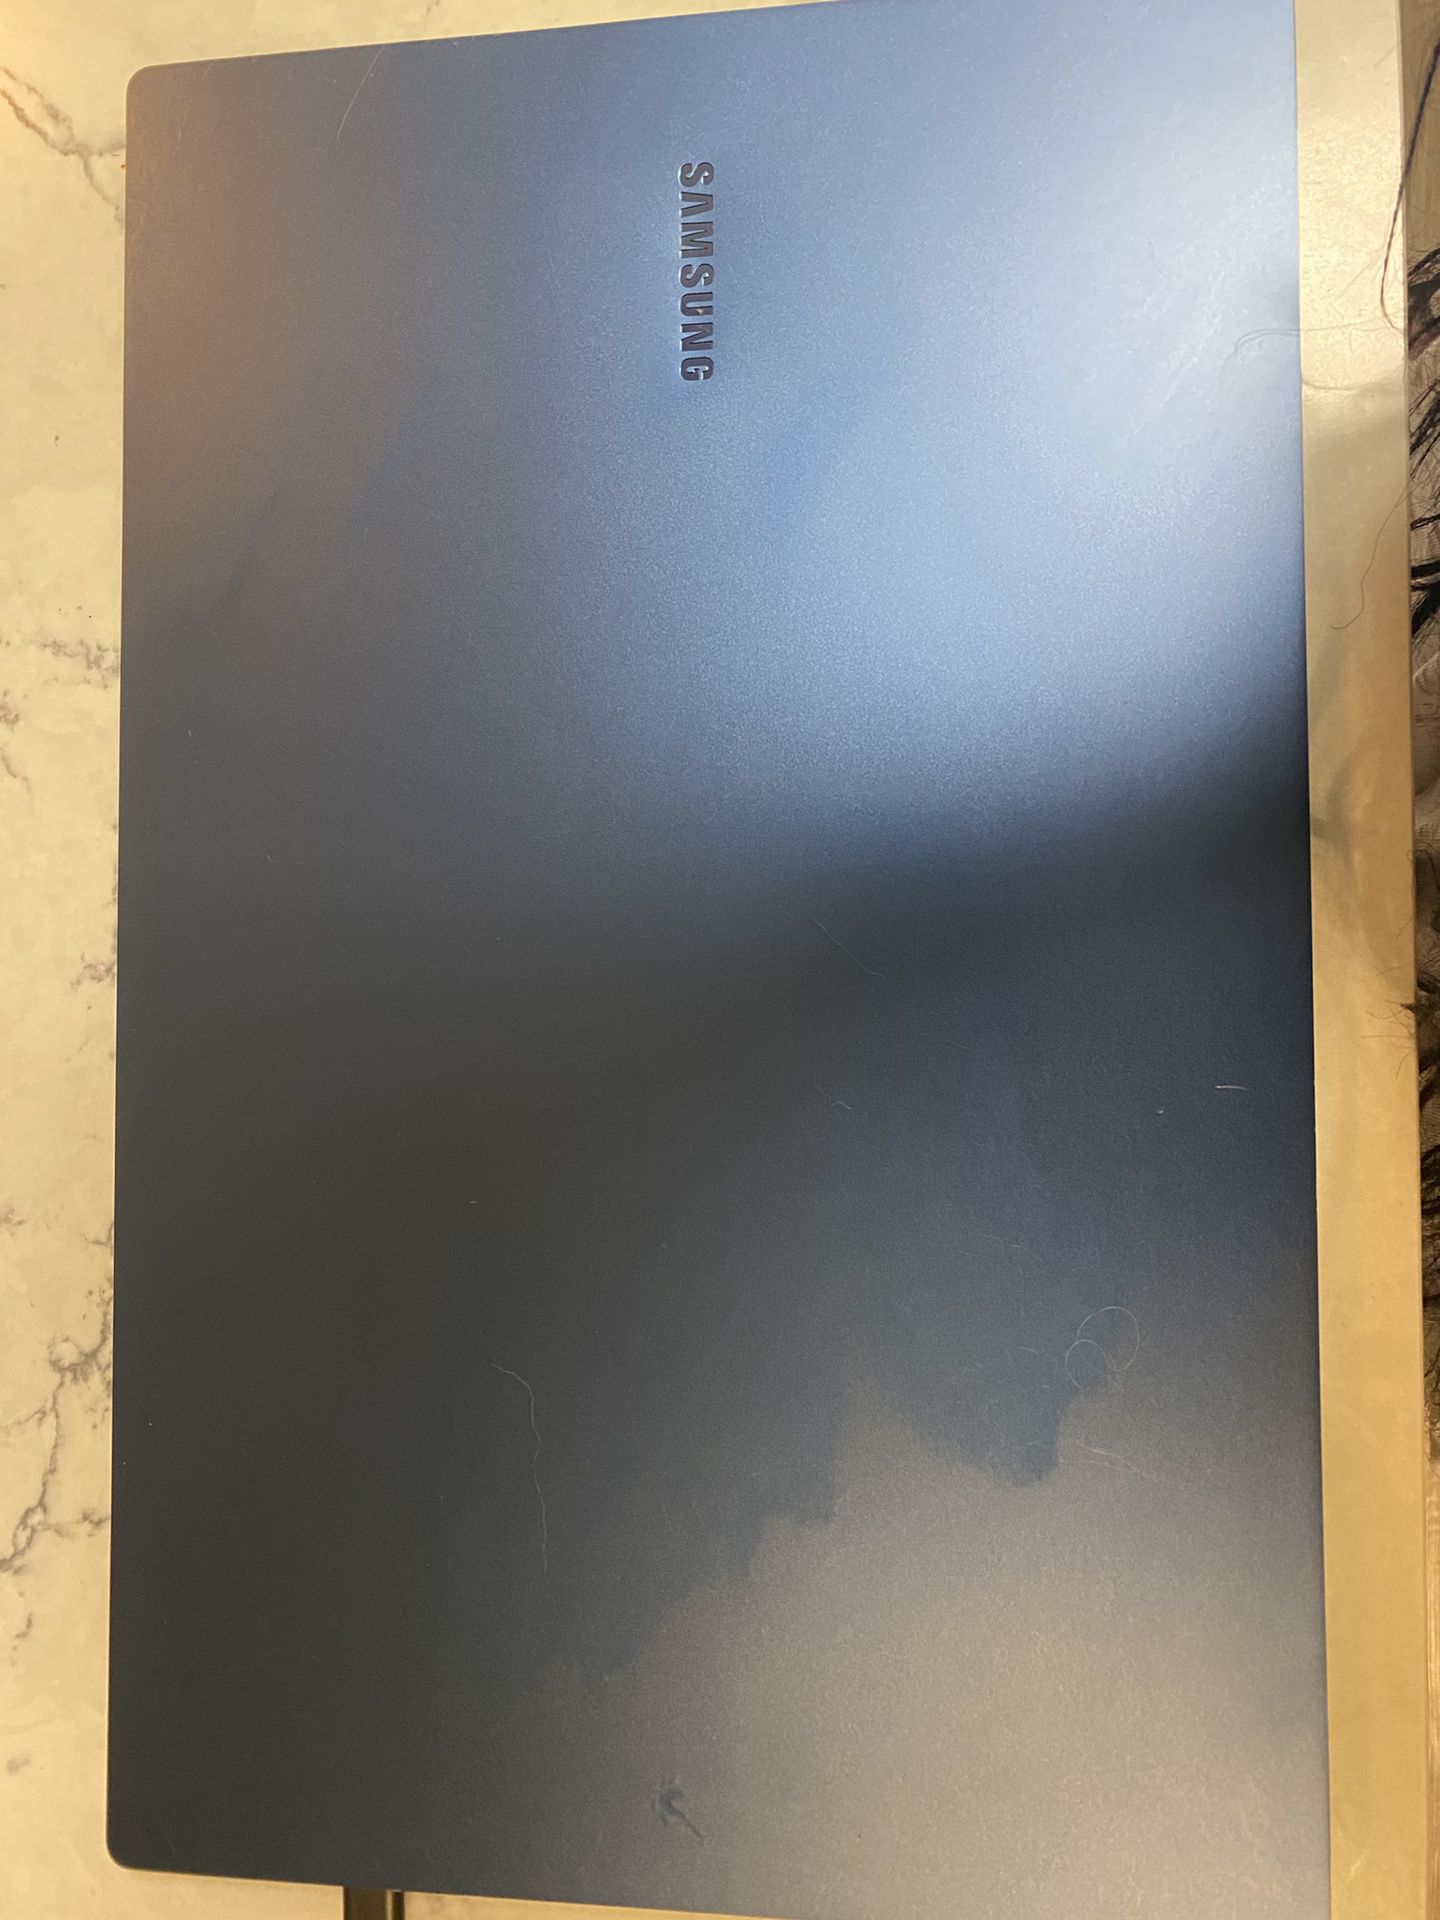 Samsung 15.6 Touch Scan Laptop 